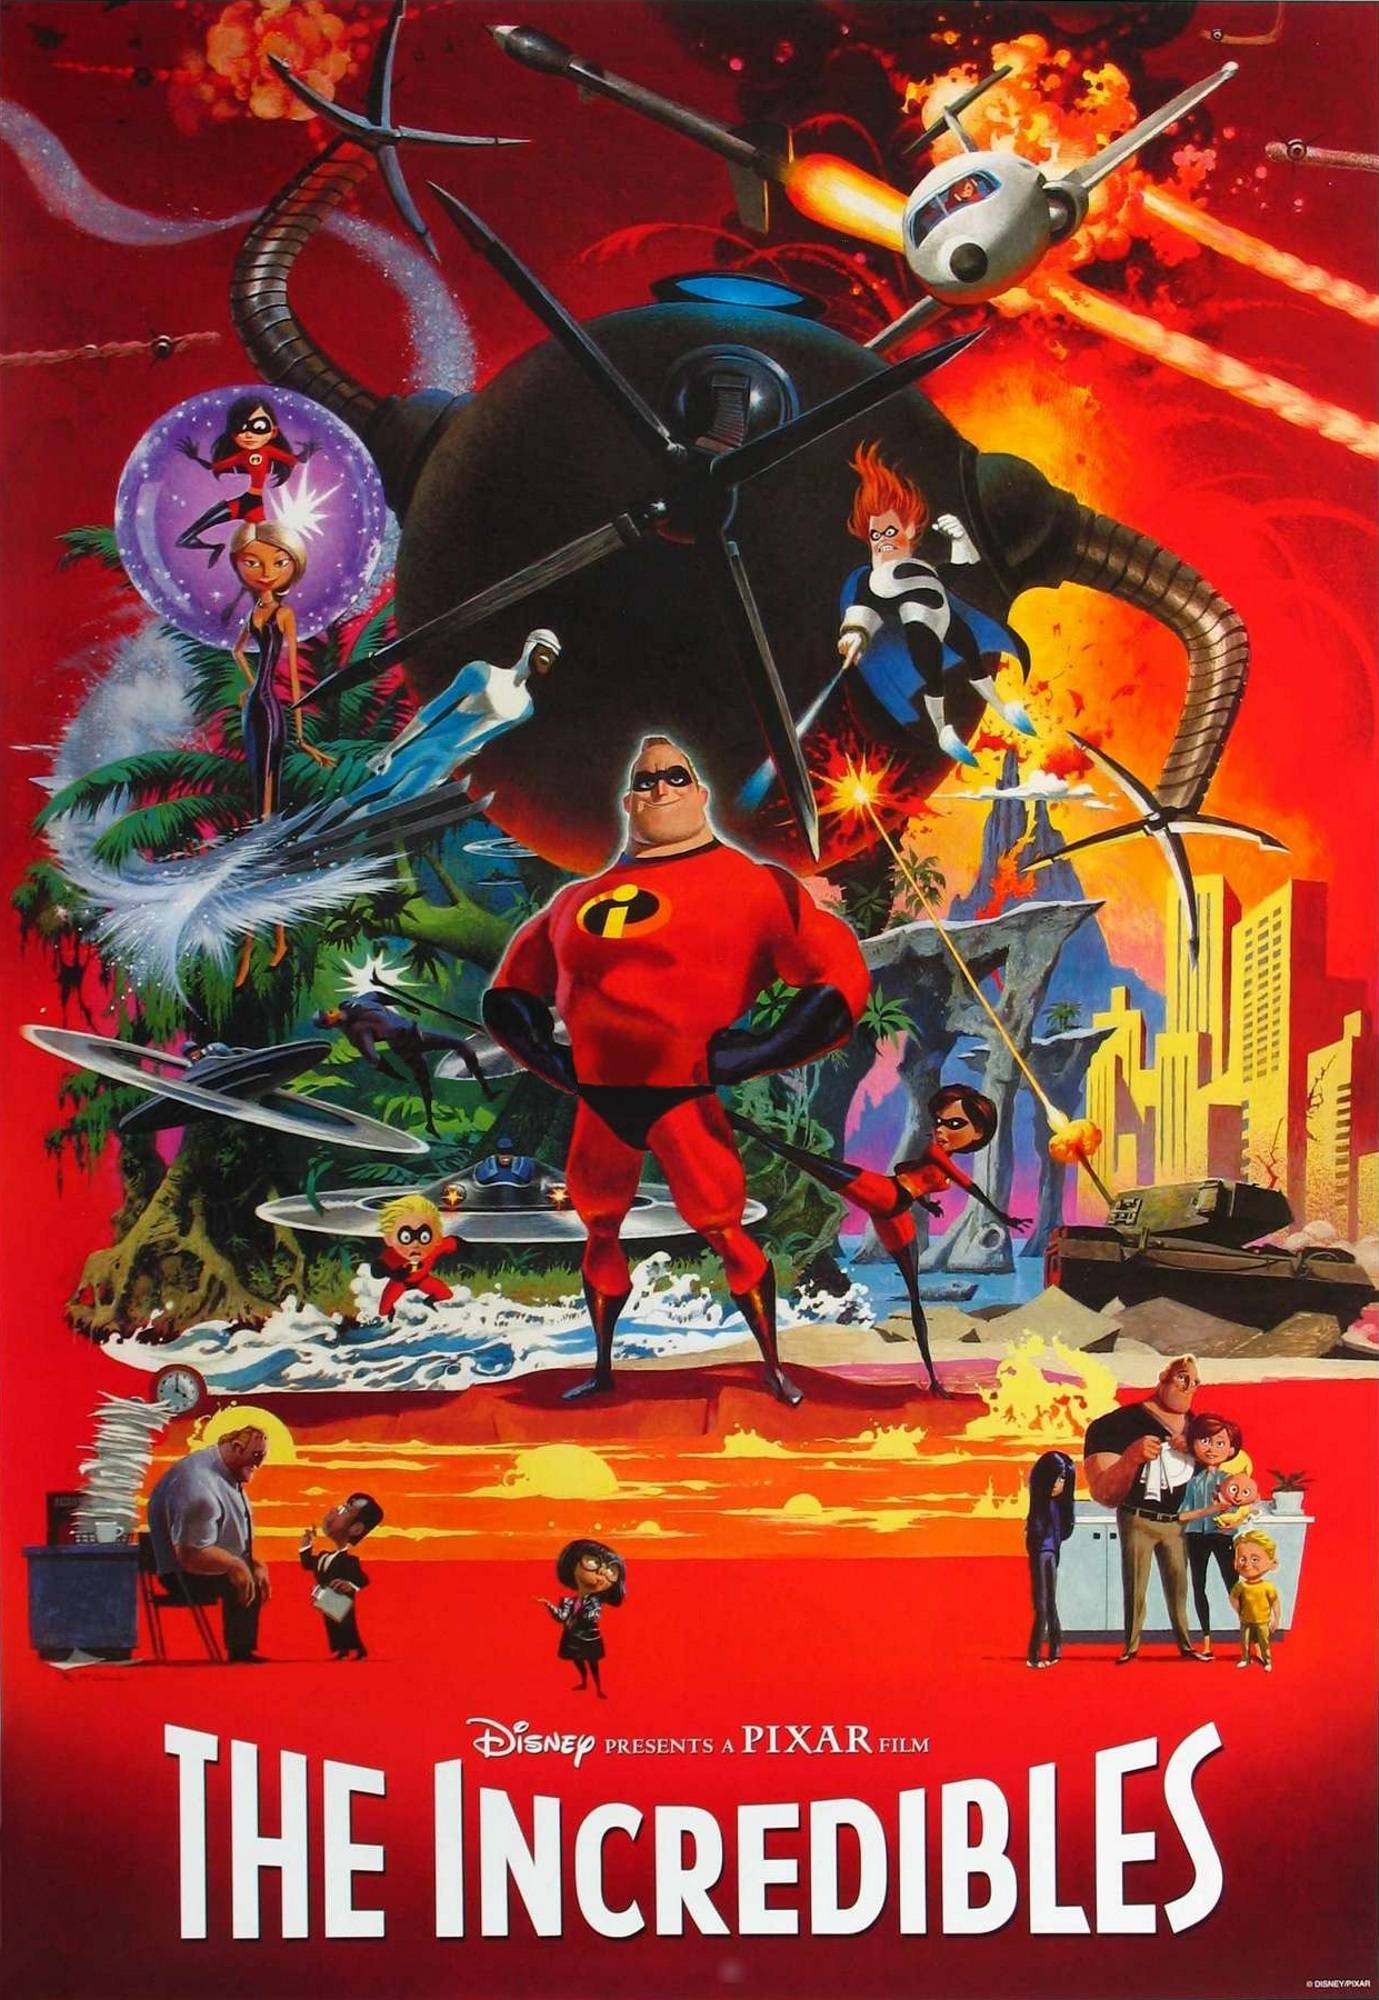 The Incredibles Movie Poster - Robert Mcginnis The Incredibles , HD Wallpaper & Backgrounds